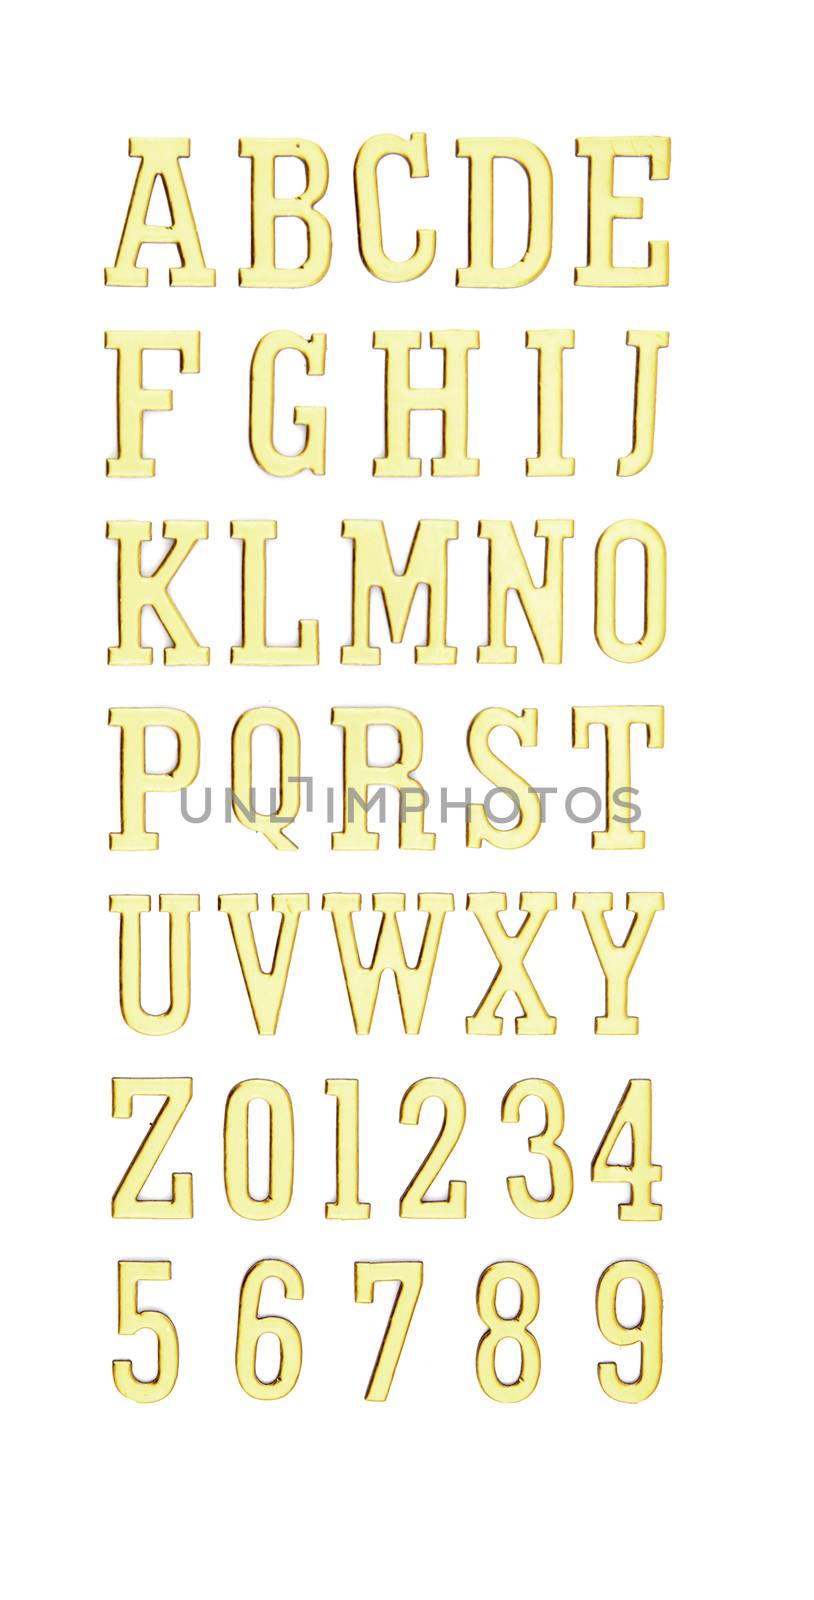 Full gold font english alphabet and number set isolated on white by nnudoo